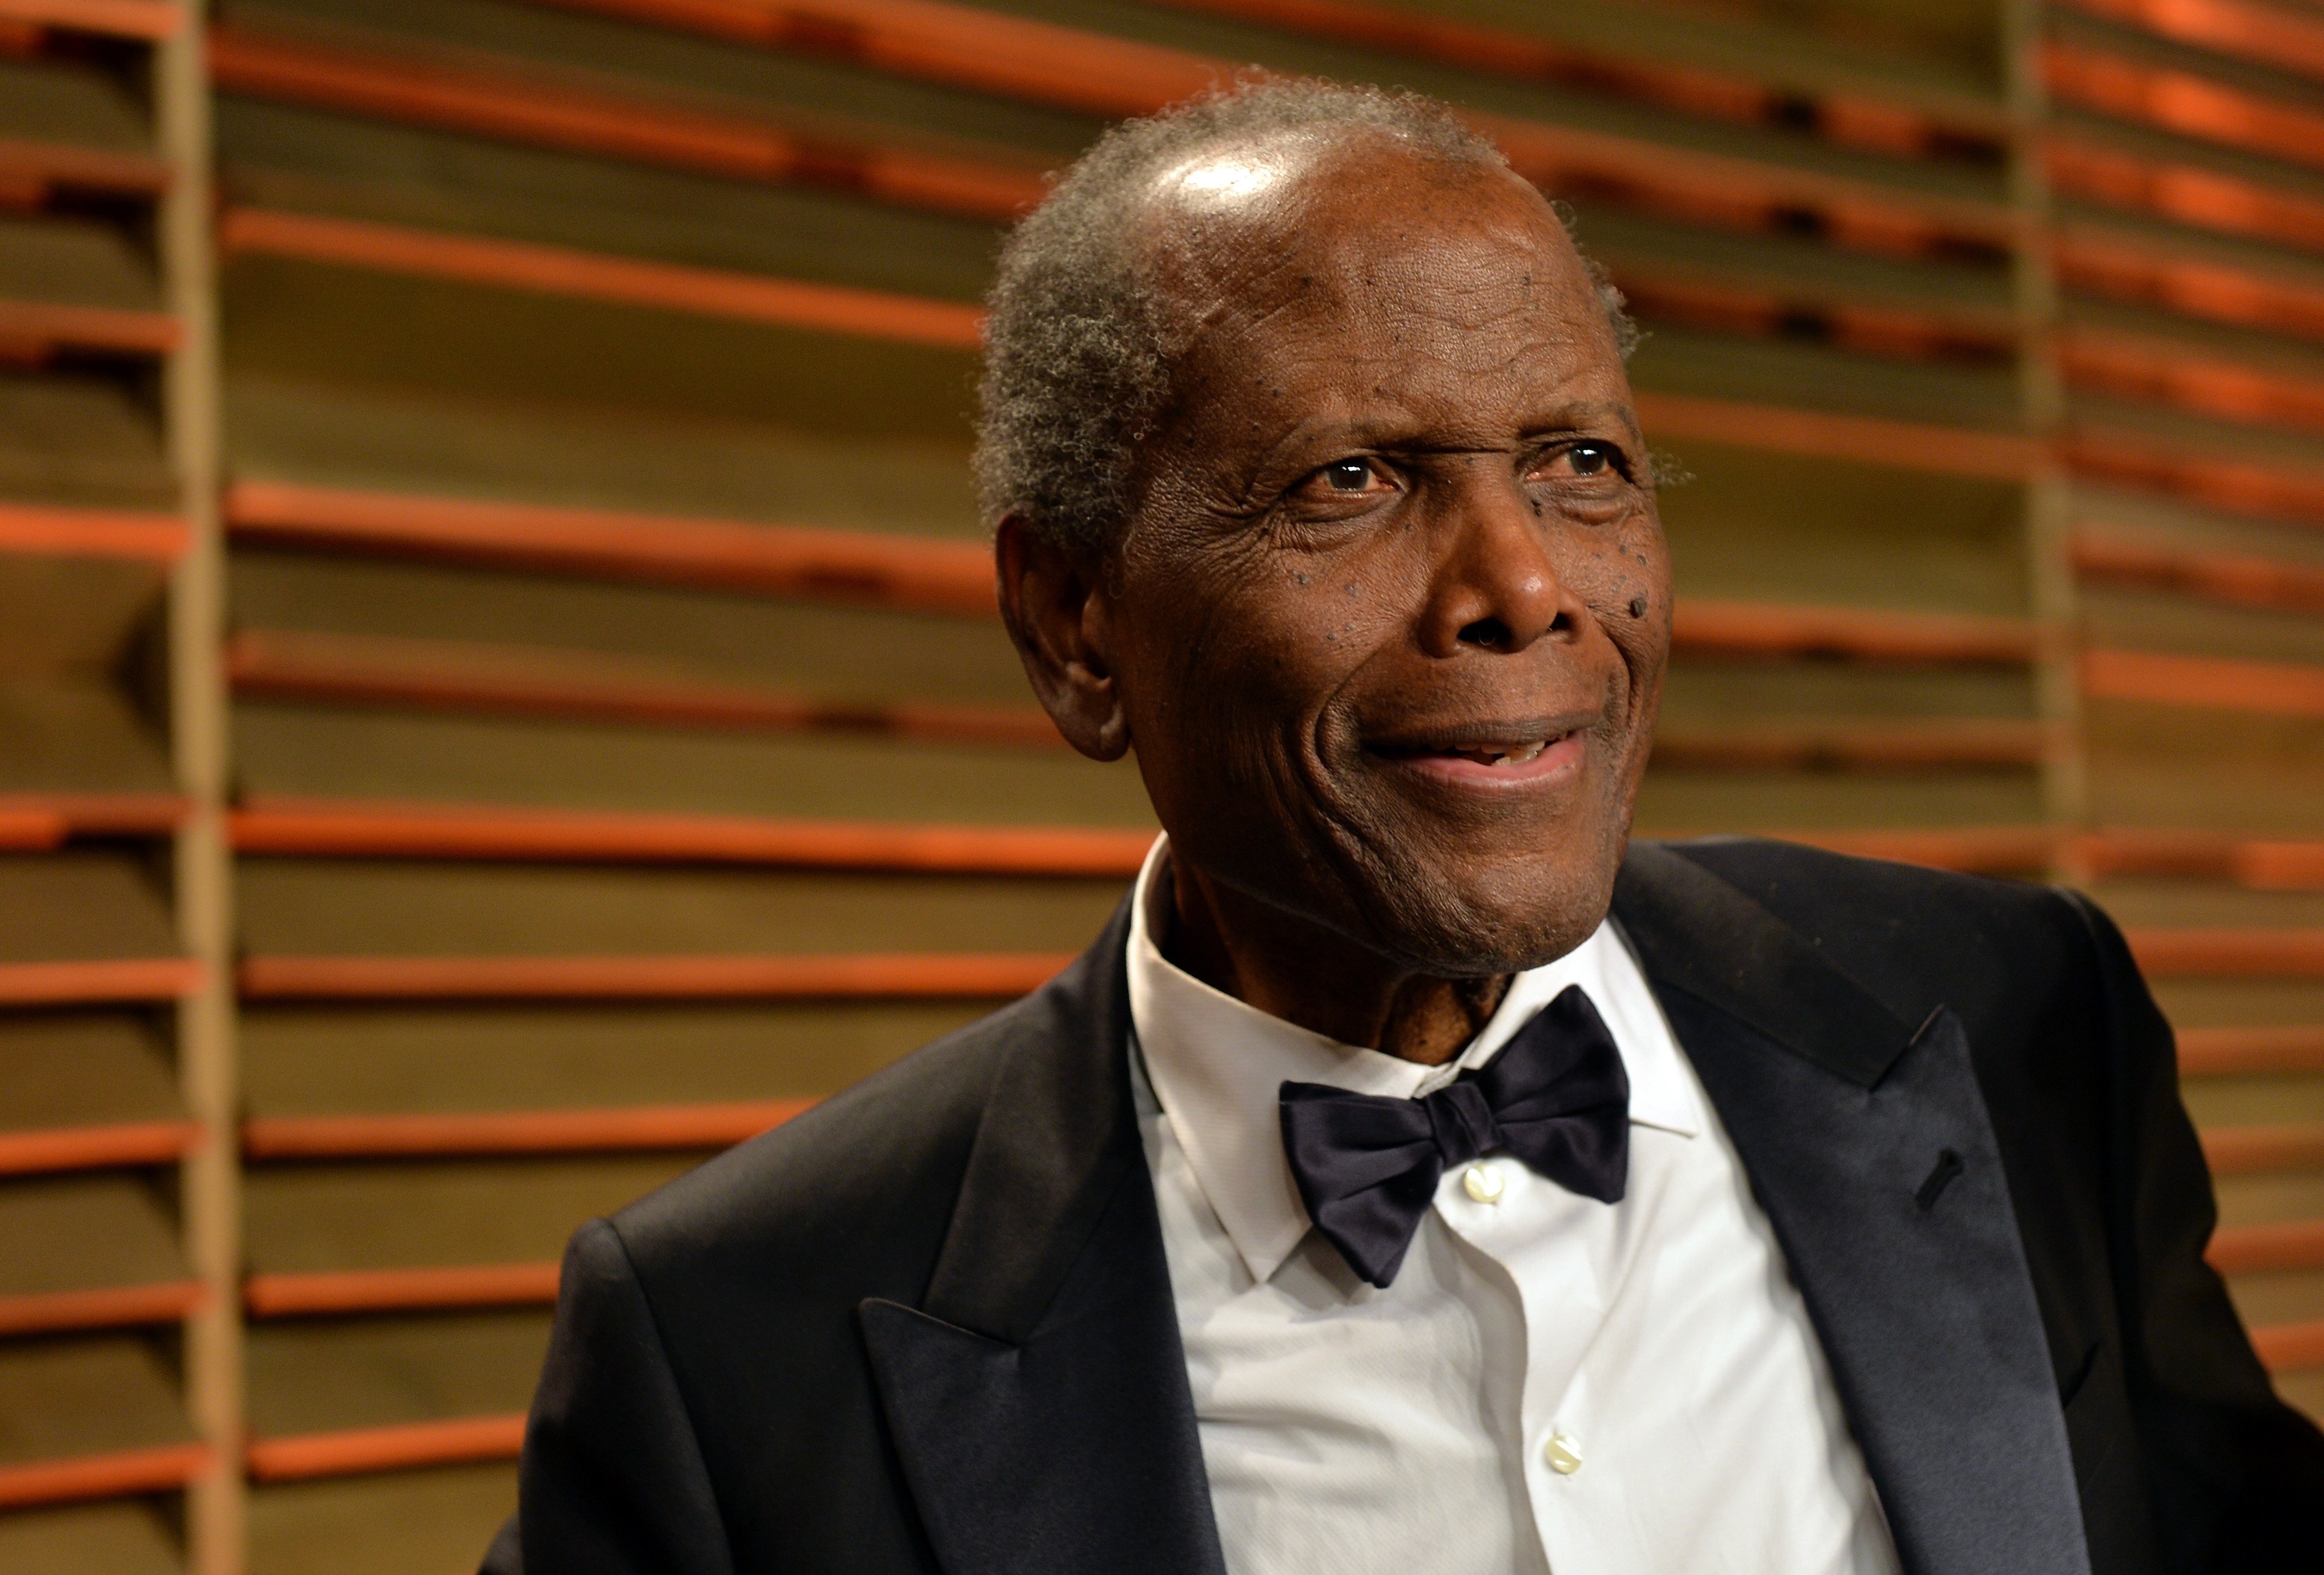 Sidney Poitier attends the 2014 Vanity Fair Oscar Party, West Hollywood, California. | Photo: Getty Images